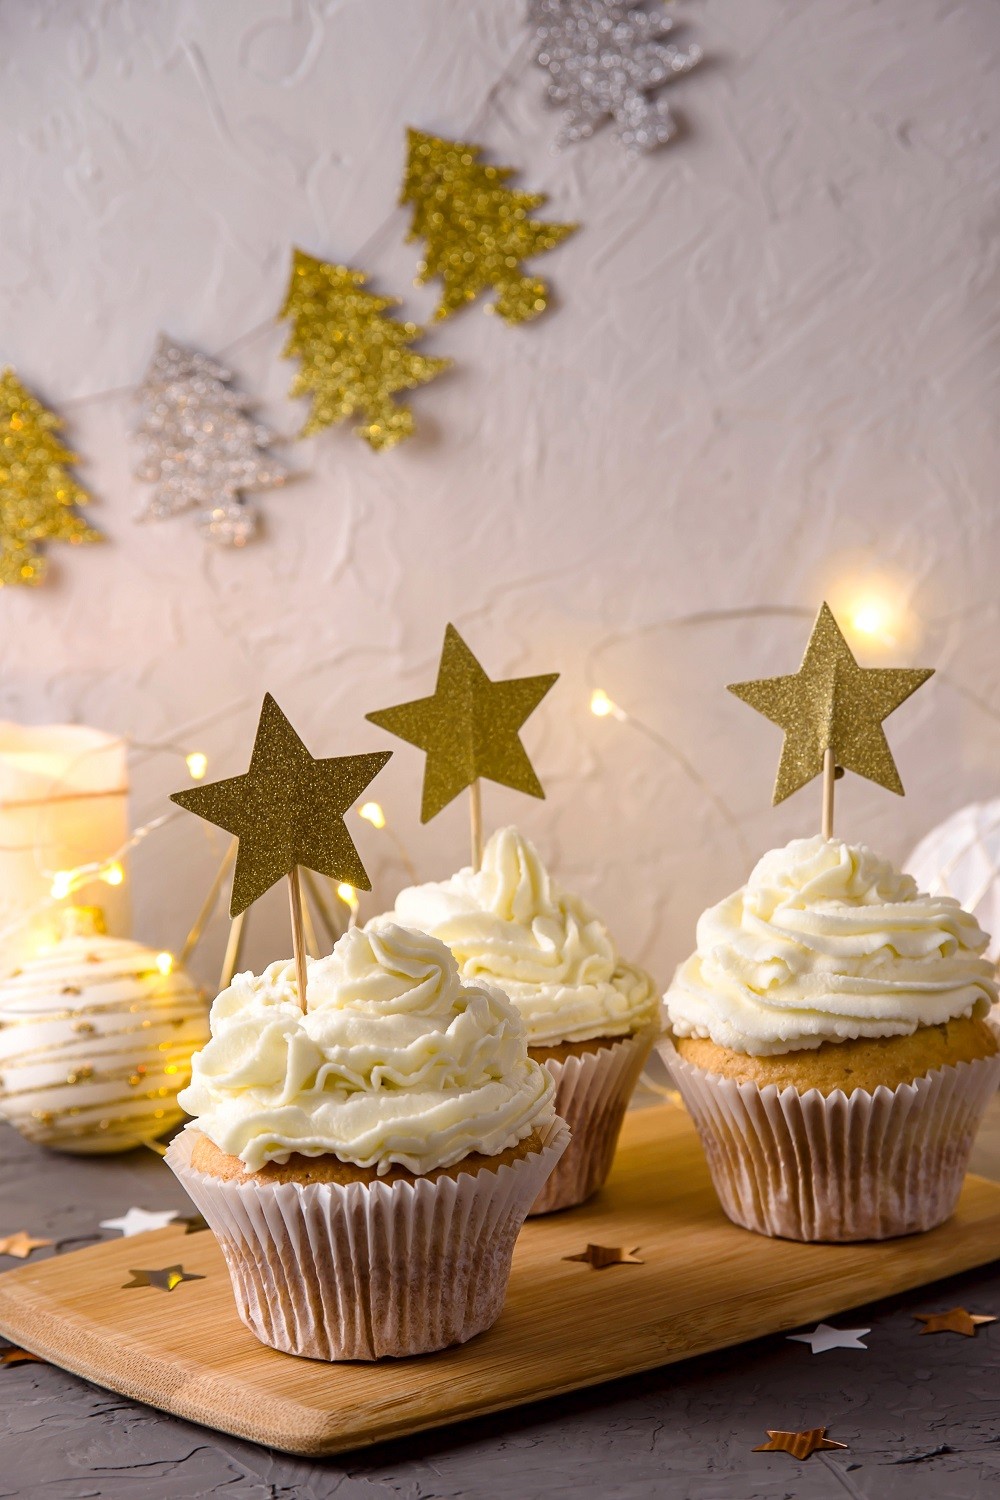 Christmas stylish dessert cupcakes with cream and golden stars